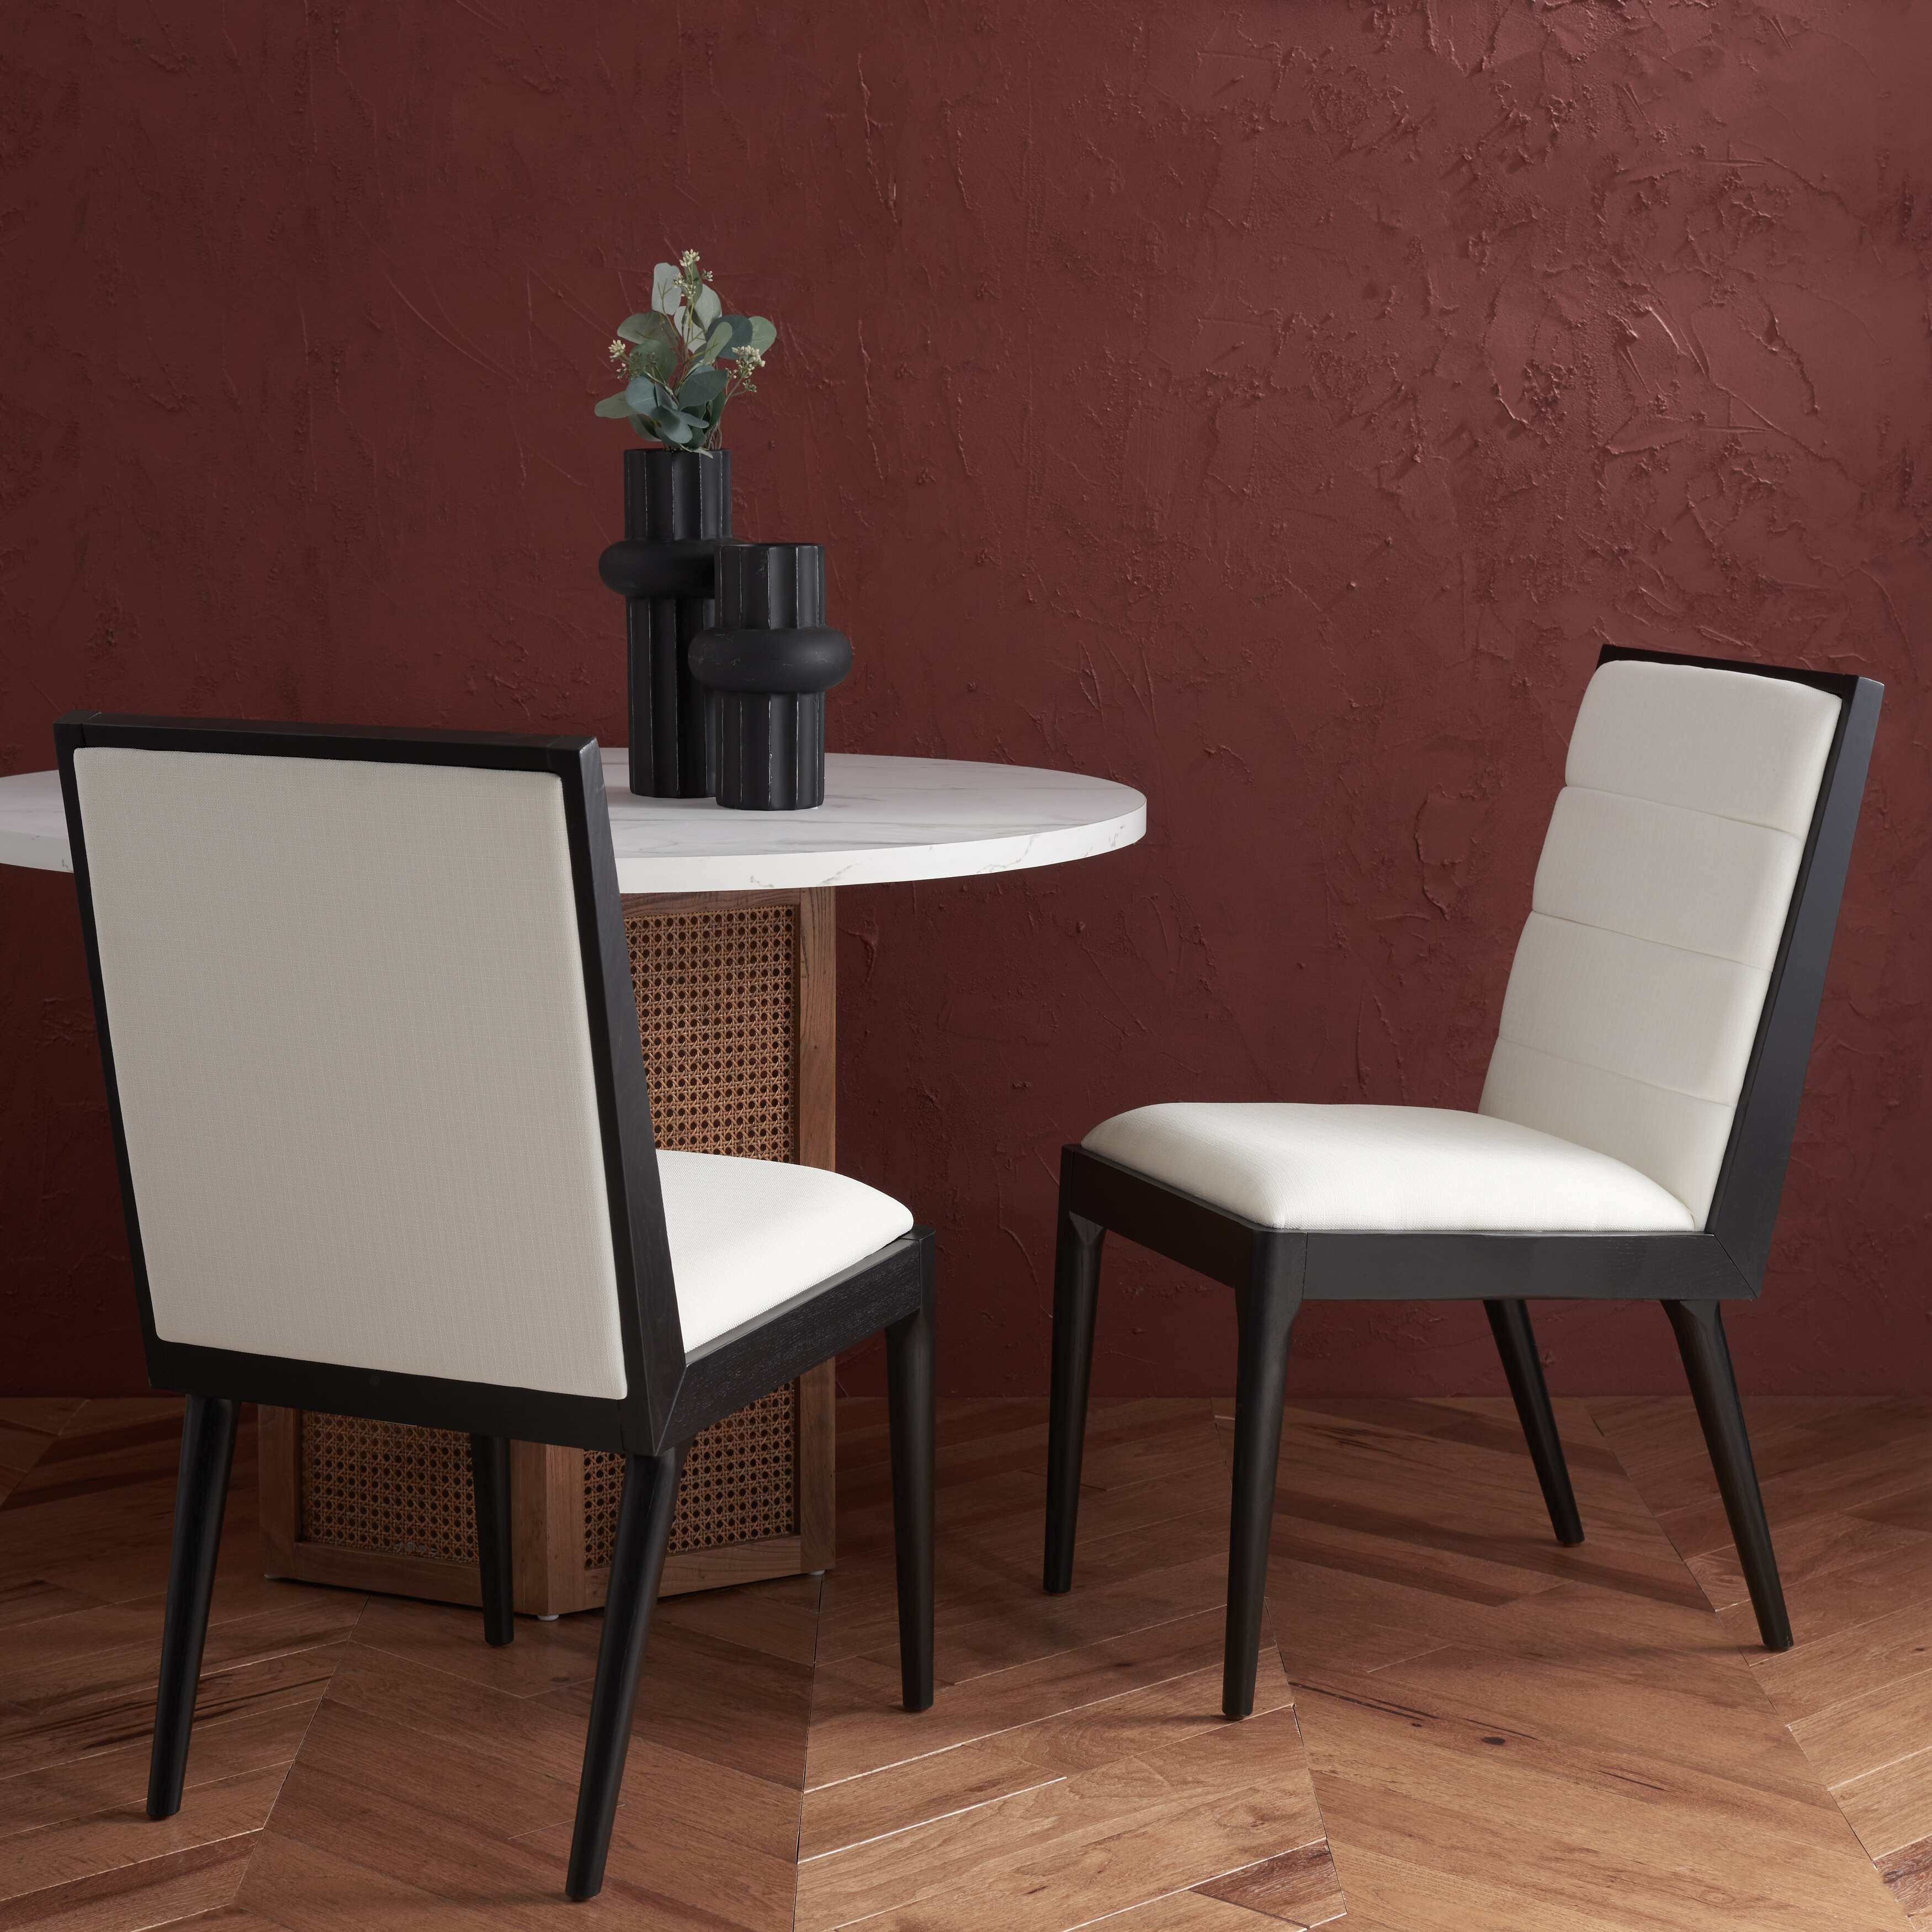 SAFAVIEH Couture Laycee Linen Dining Chair-(SET of 2). - 19 IN W x 22 IN D x 36 IN H